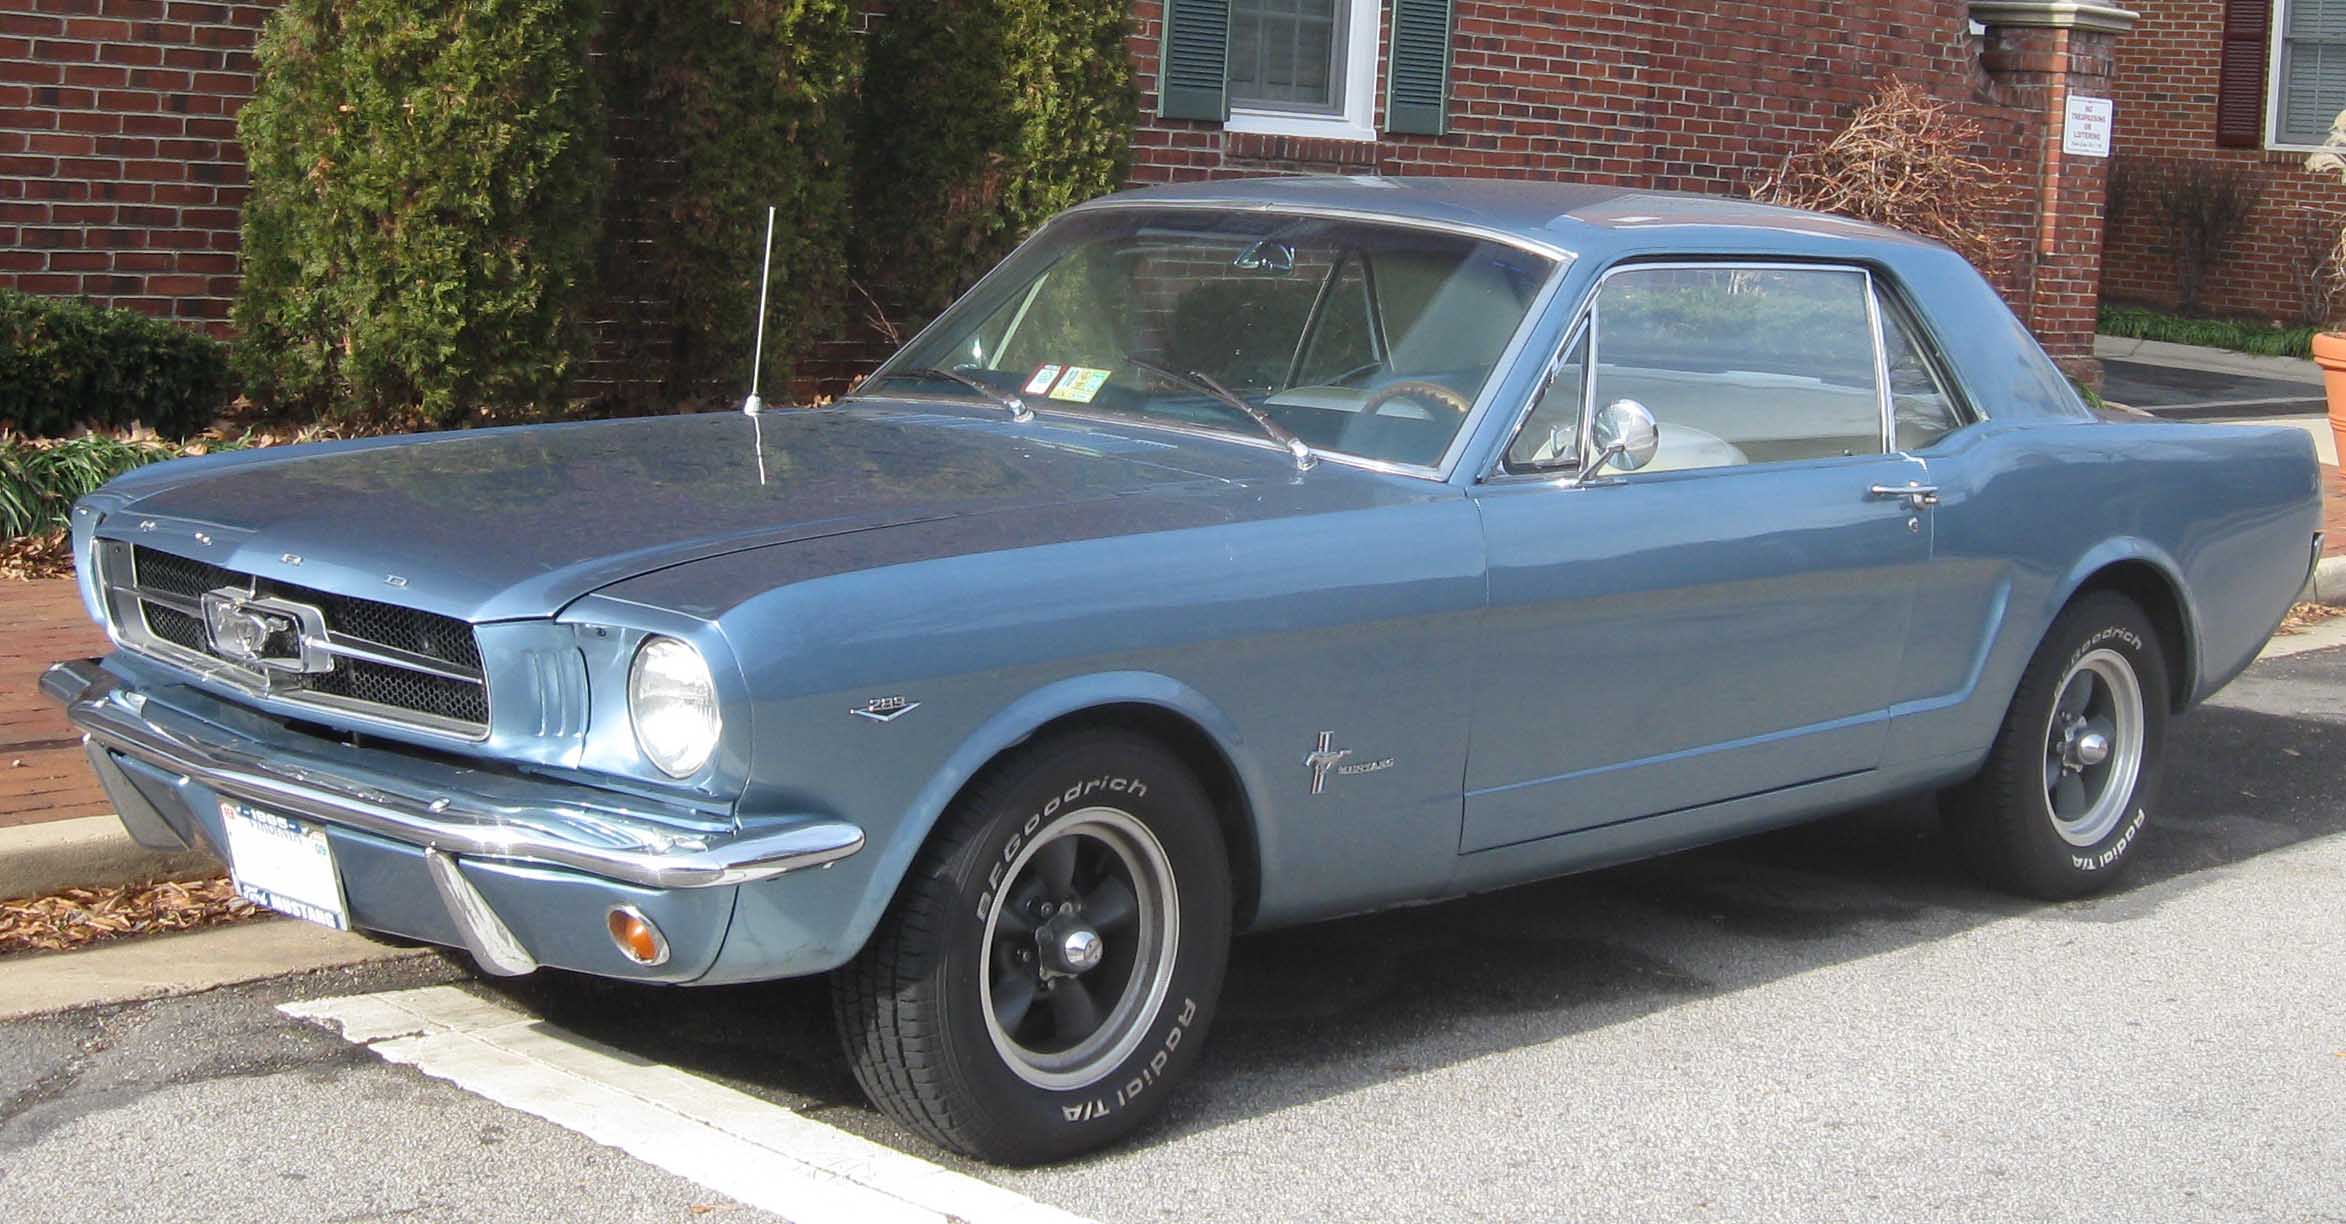 1st_Ford_Mustang_coupe.jpg